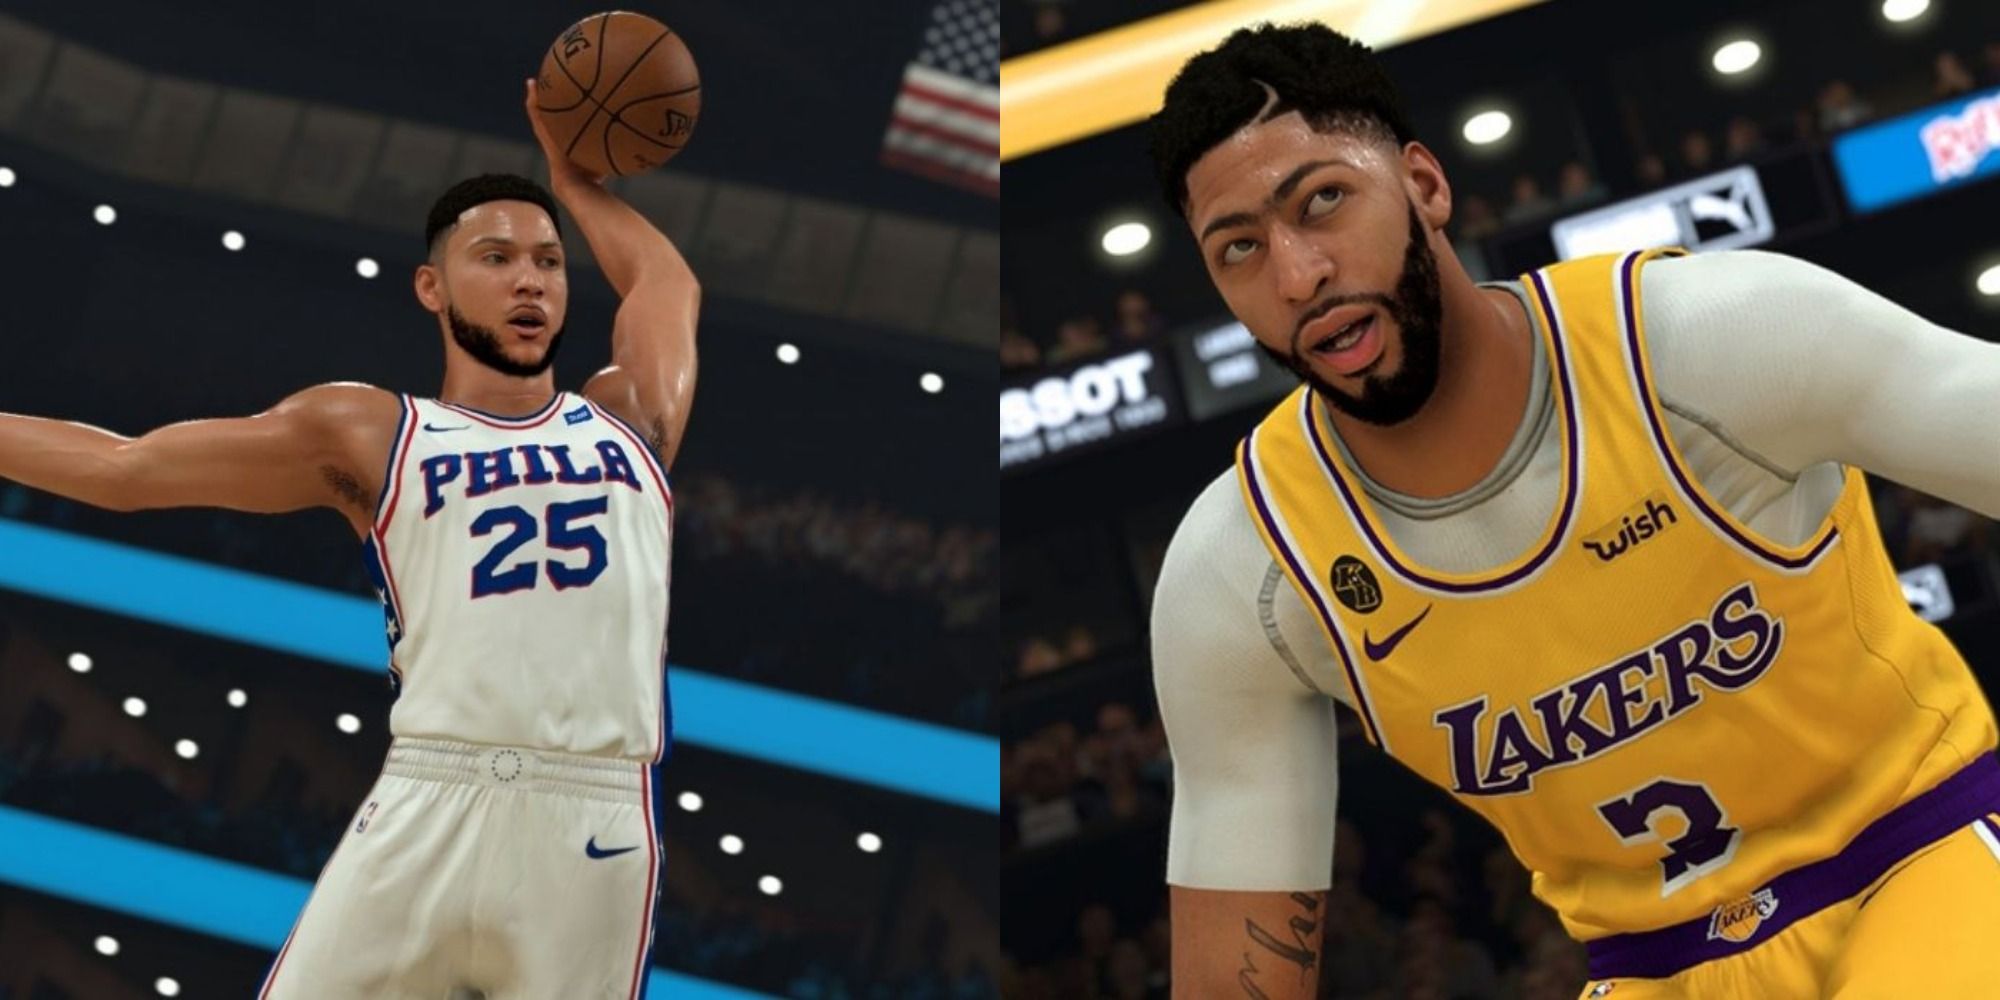 Split image of a basketball player dunking a ball and a Lakers player looking forward in NBA 2K21.